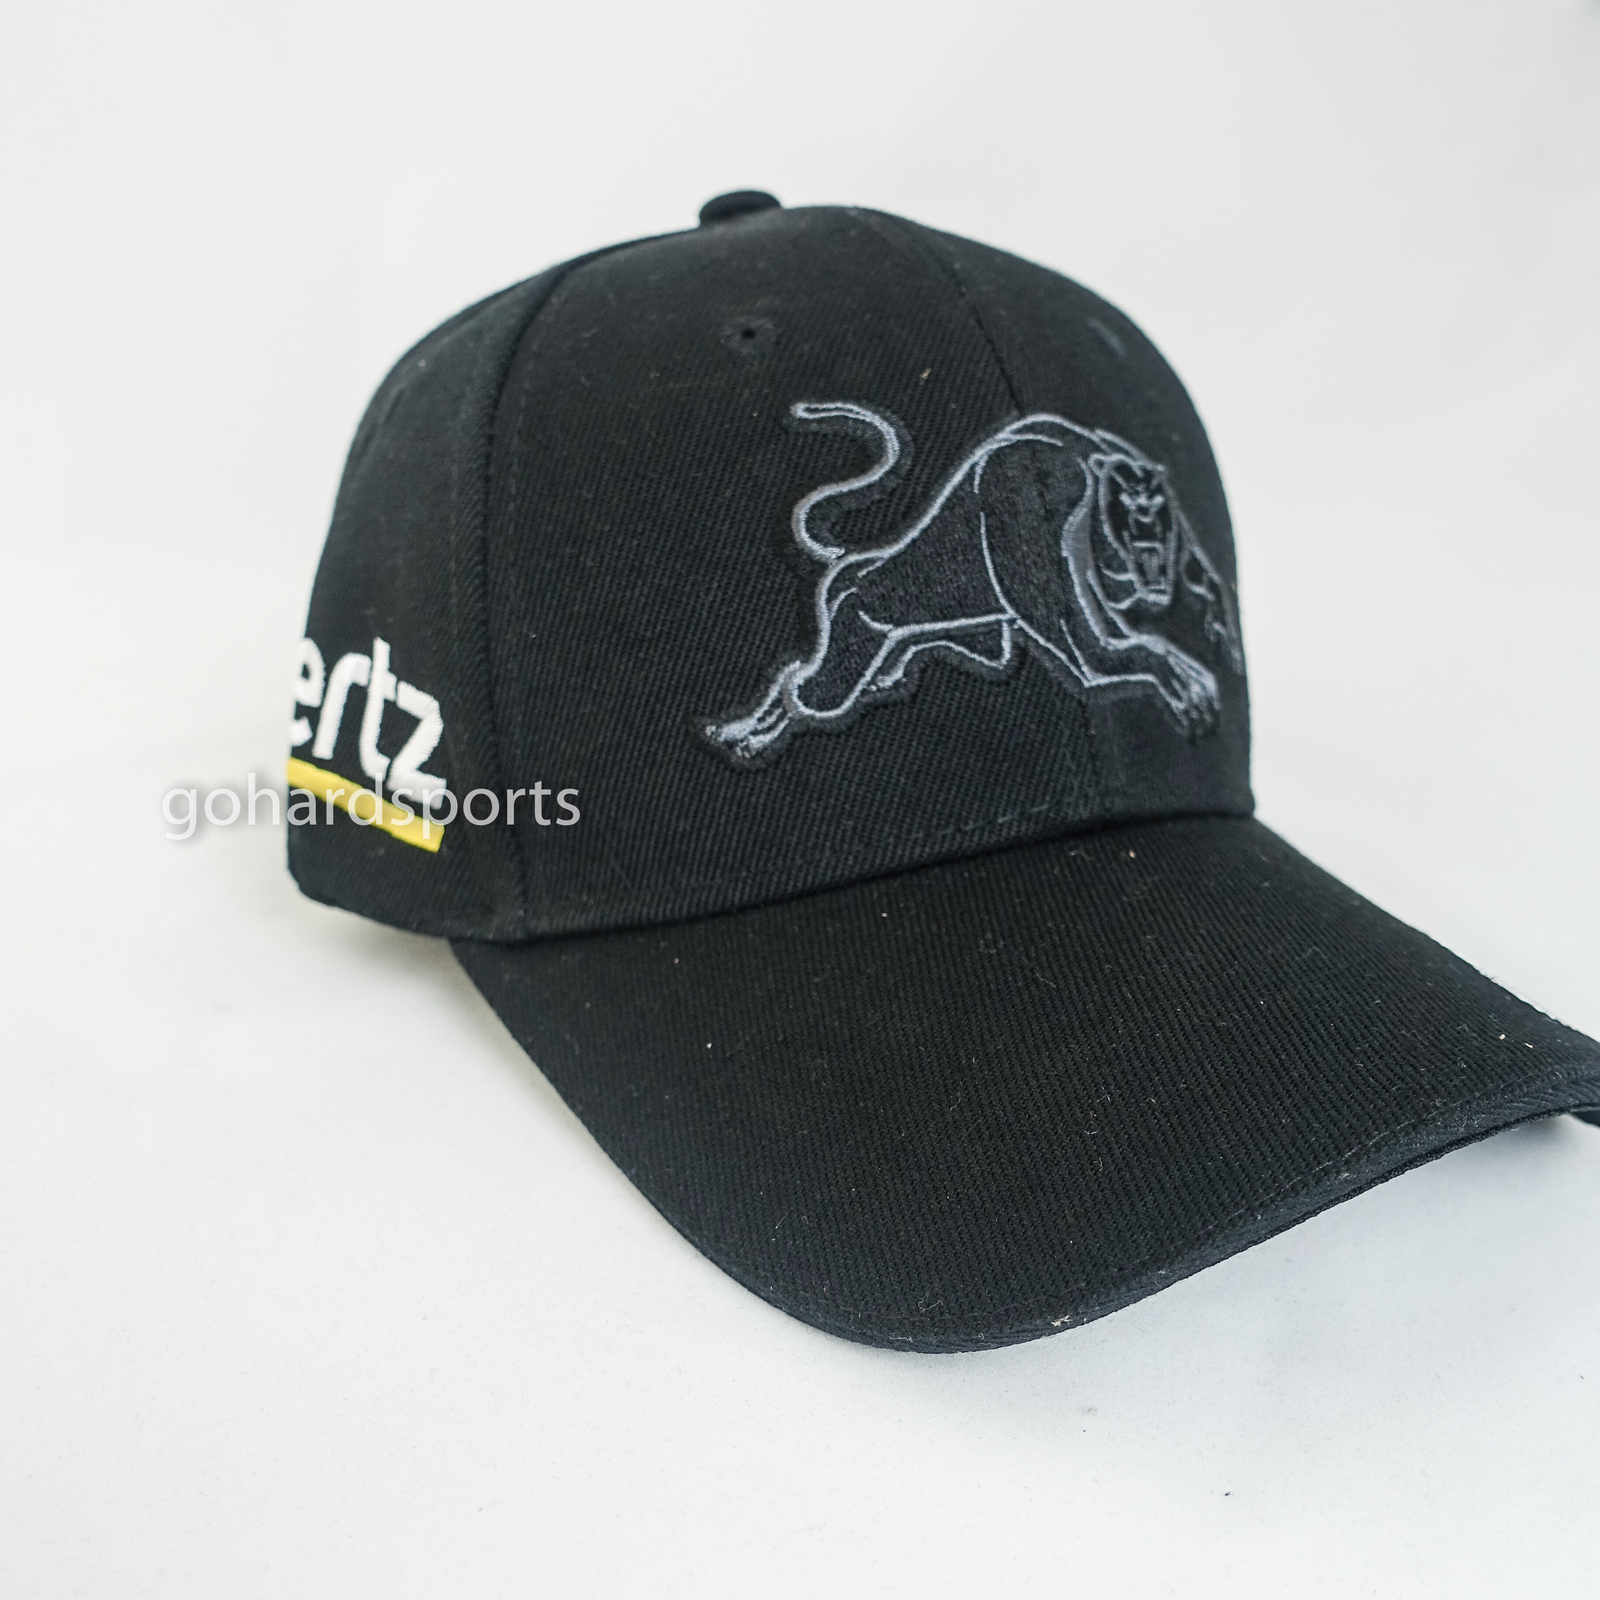 Penrith Panthers 2019 Official Media Cap *One Size Fits Most*